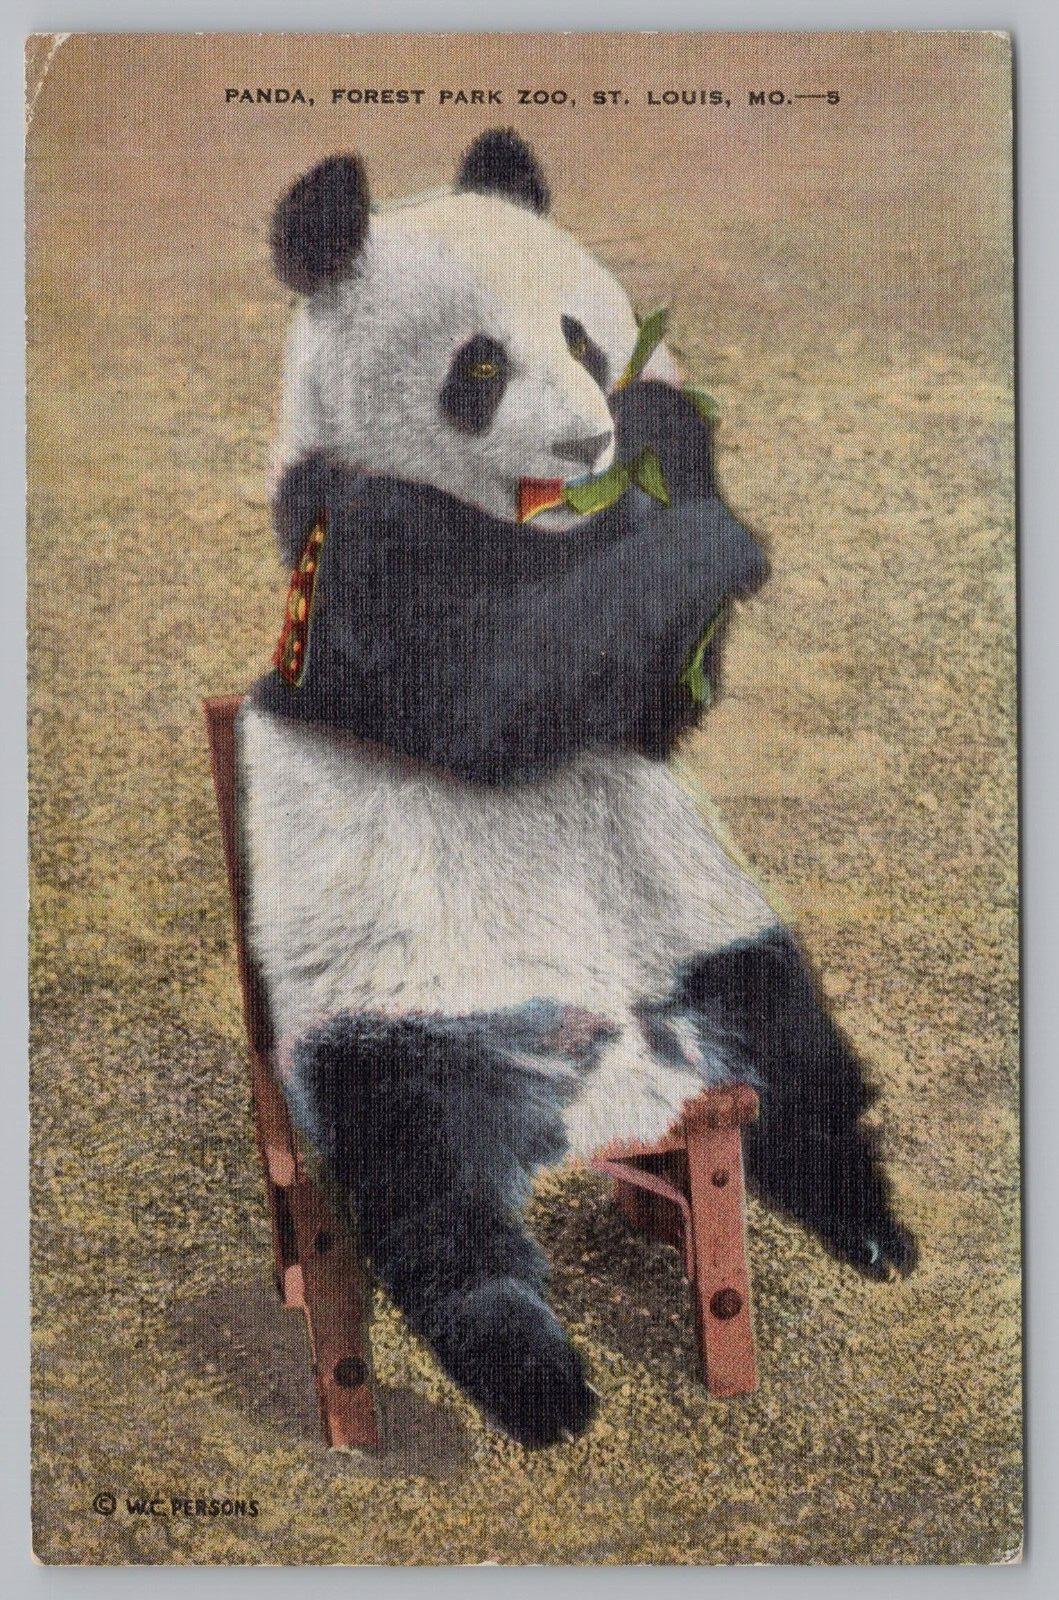 Postcard Panda in the St Louis Missouri Forest Park Zoo Posted 1942 Linen